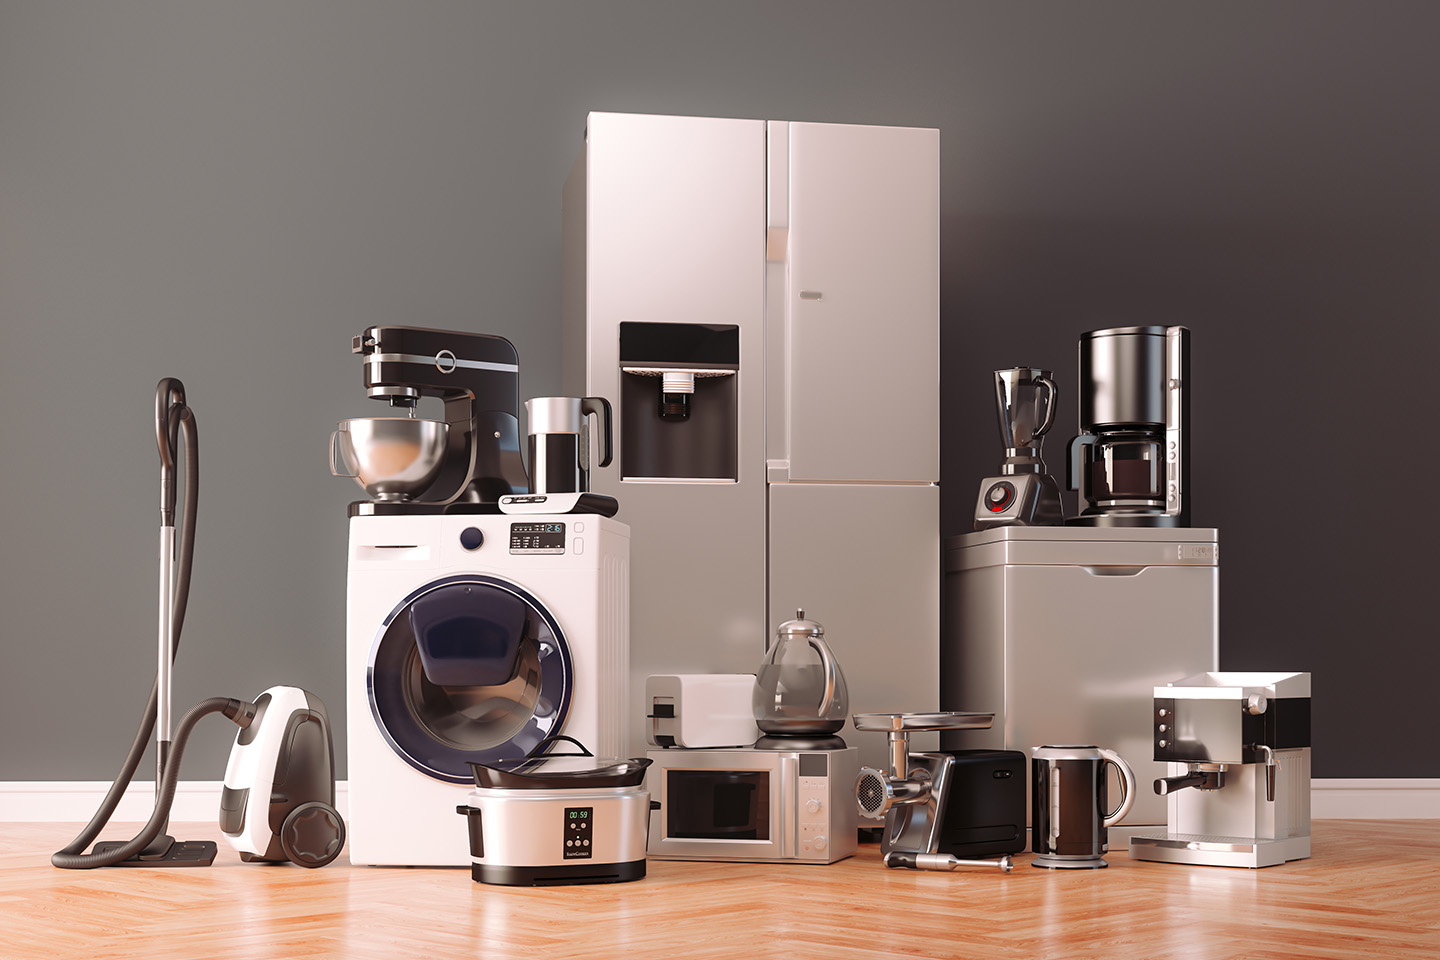 Insider information on upgrading your home appliances